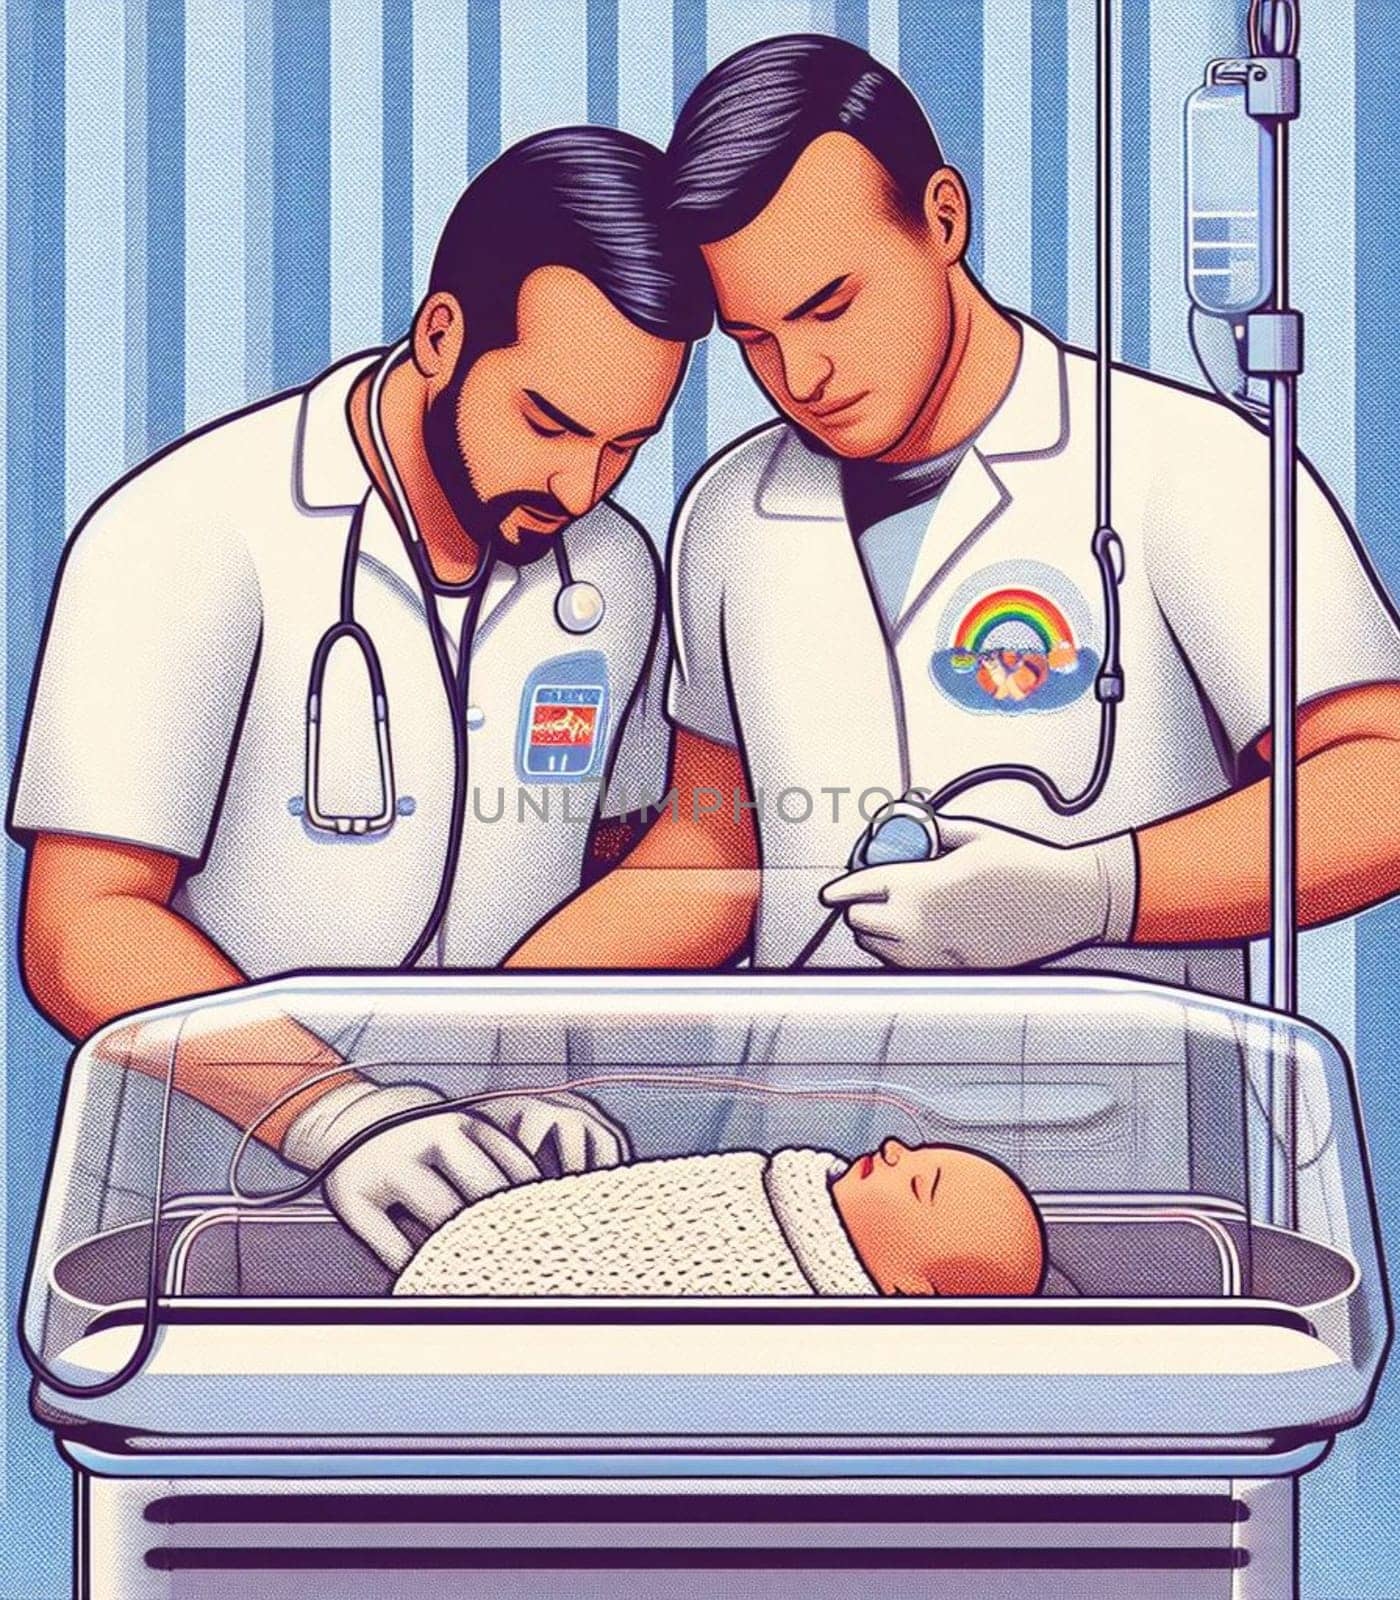 illustration depicting medical staff people at the hospital take care of newborn baby by verbano